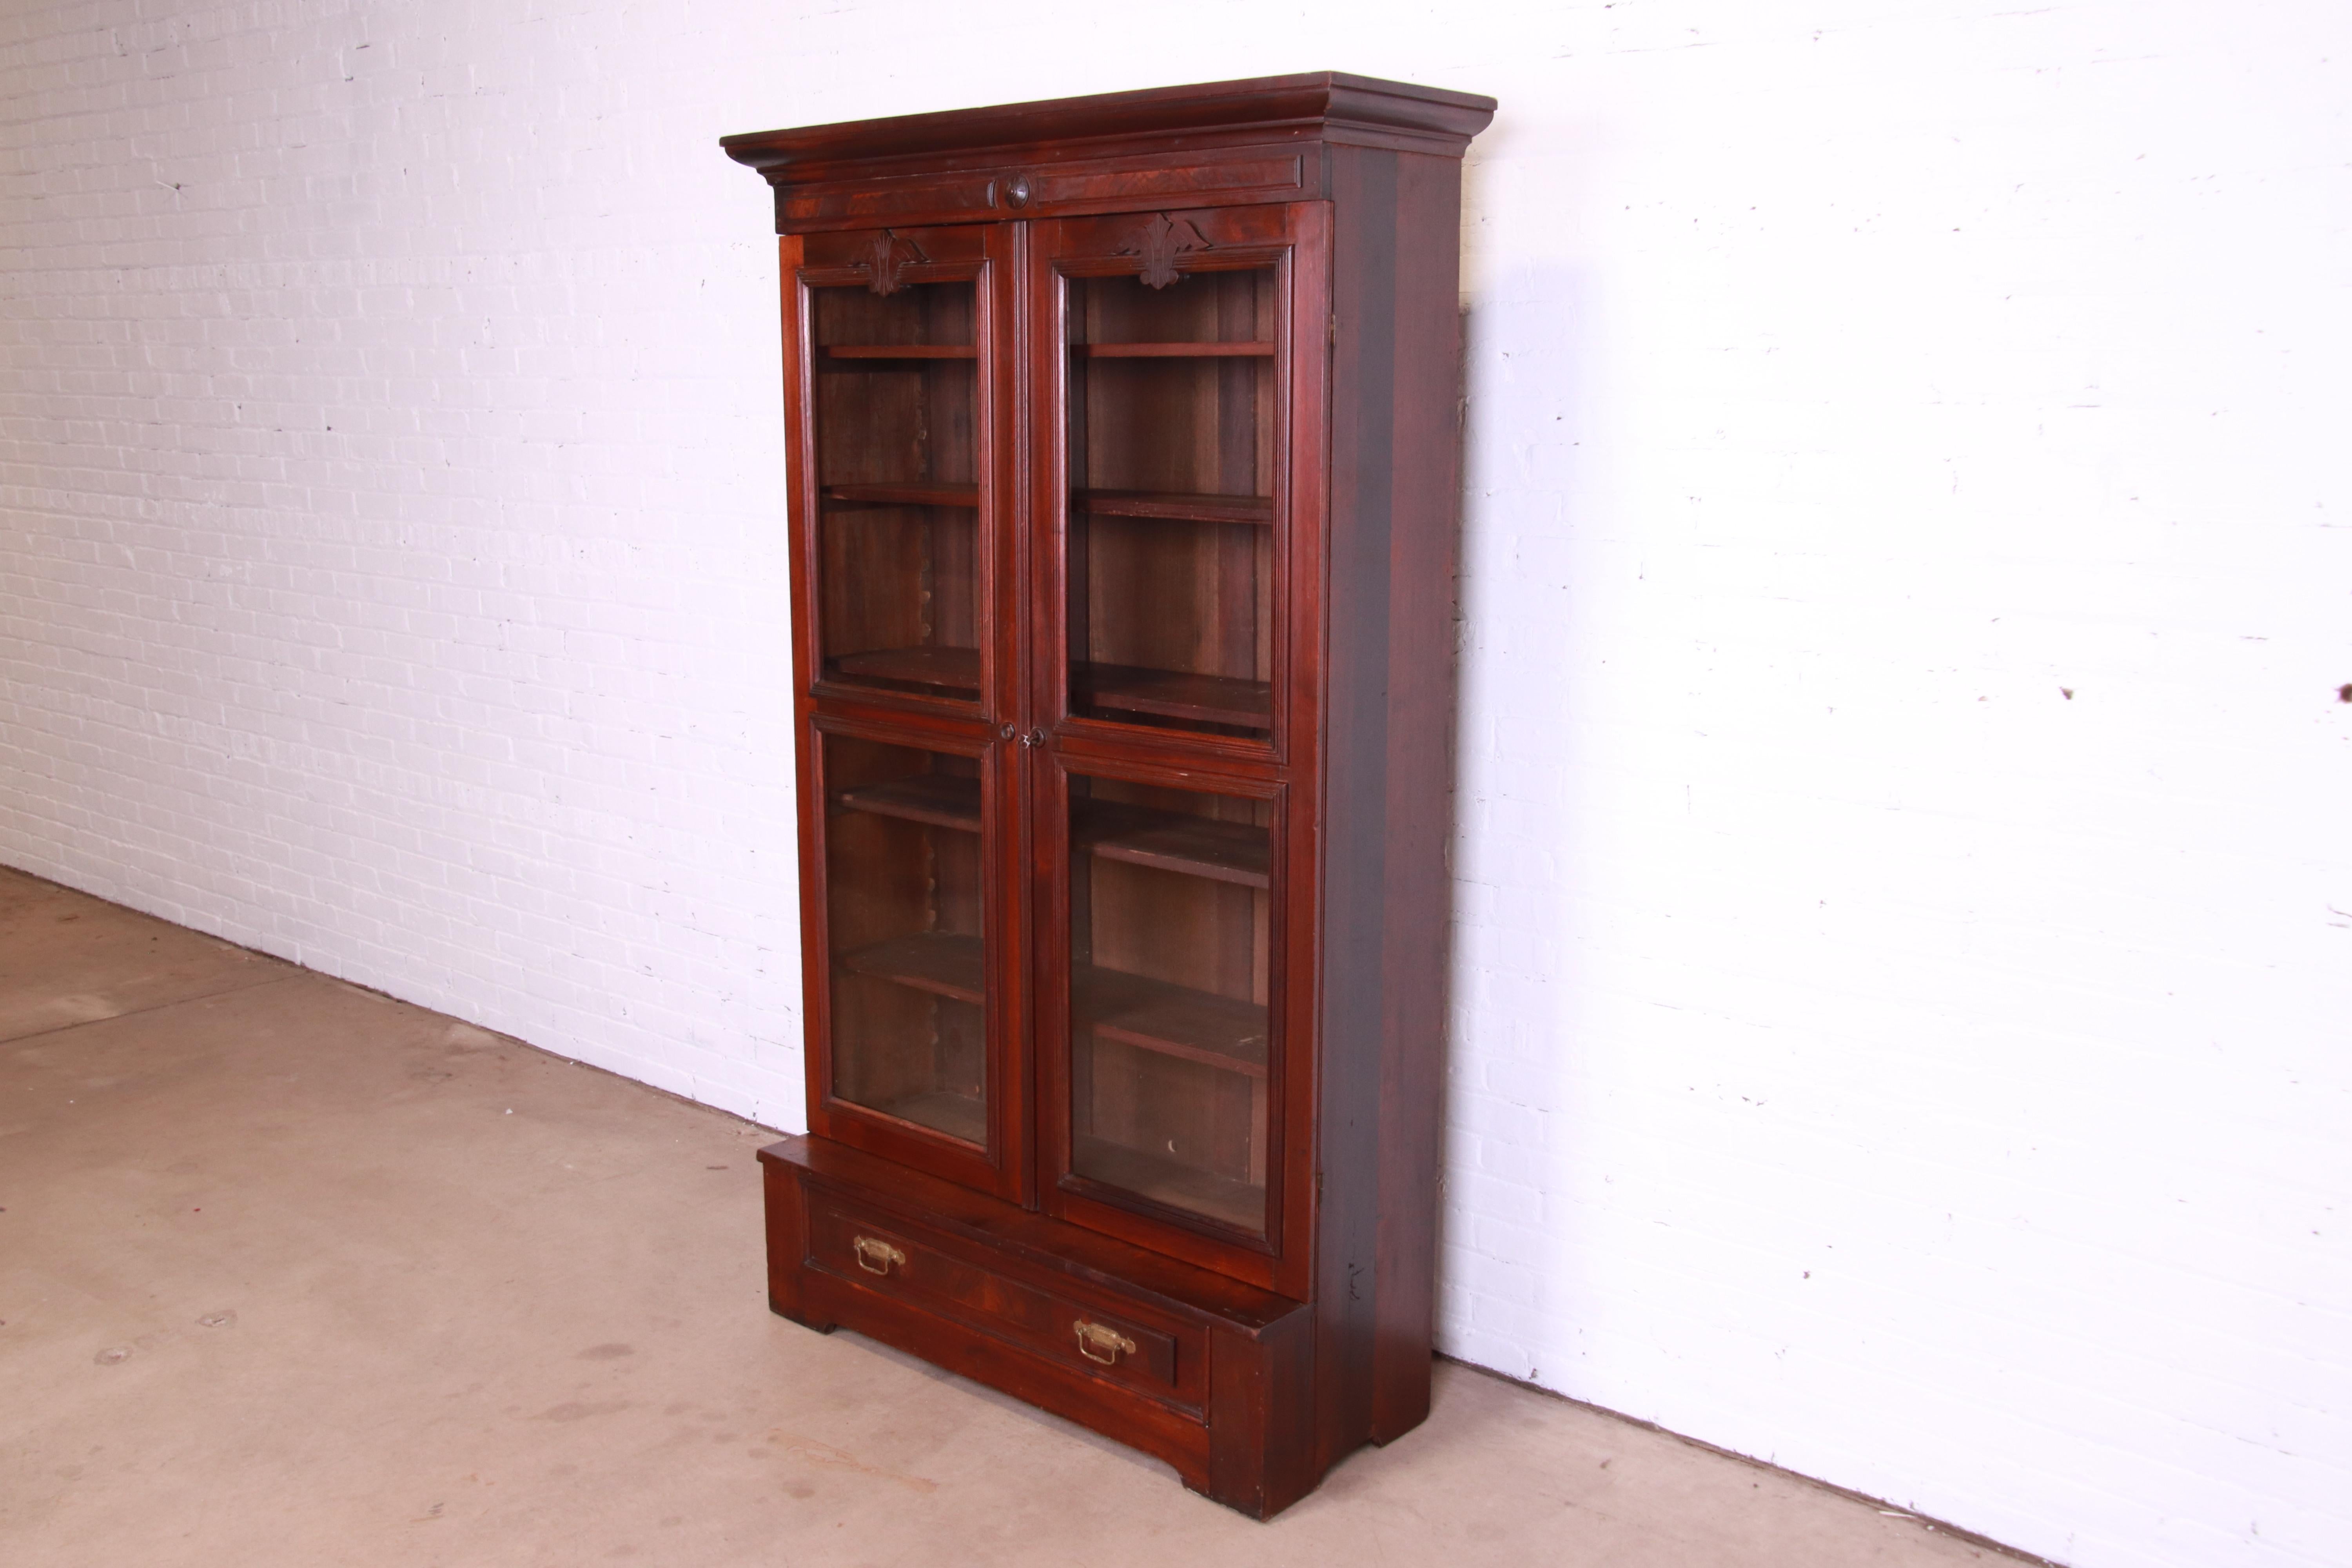 A beautiful antique Victorian Eastlake bookcase

USA, Circa 1880s

Carved walnut, with burled walnut accents, glass front doors, and original brass hardware.

Measures: 47.75